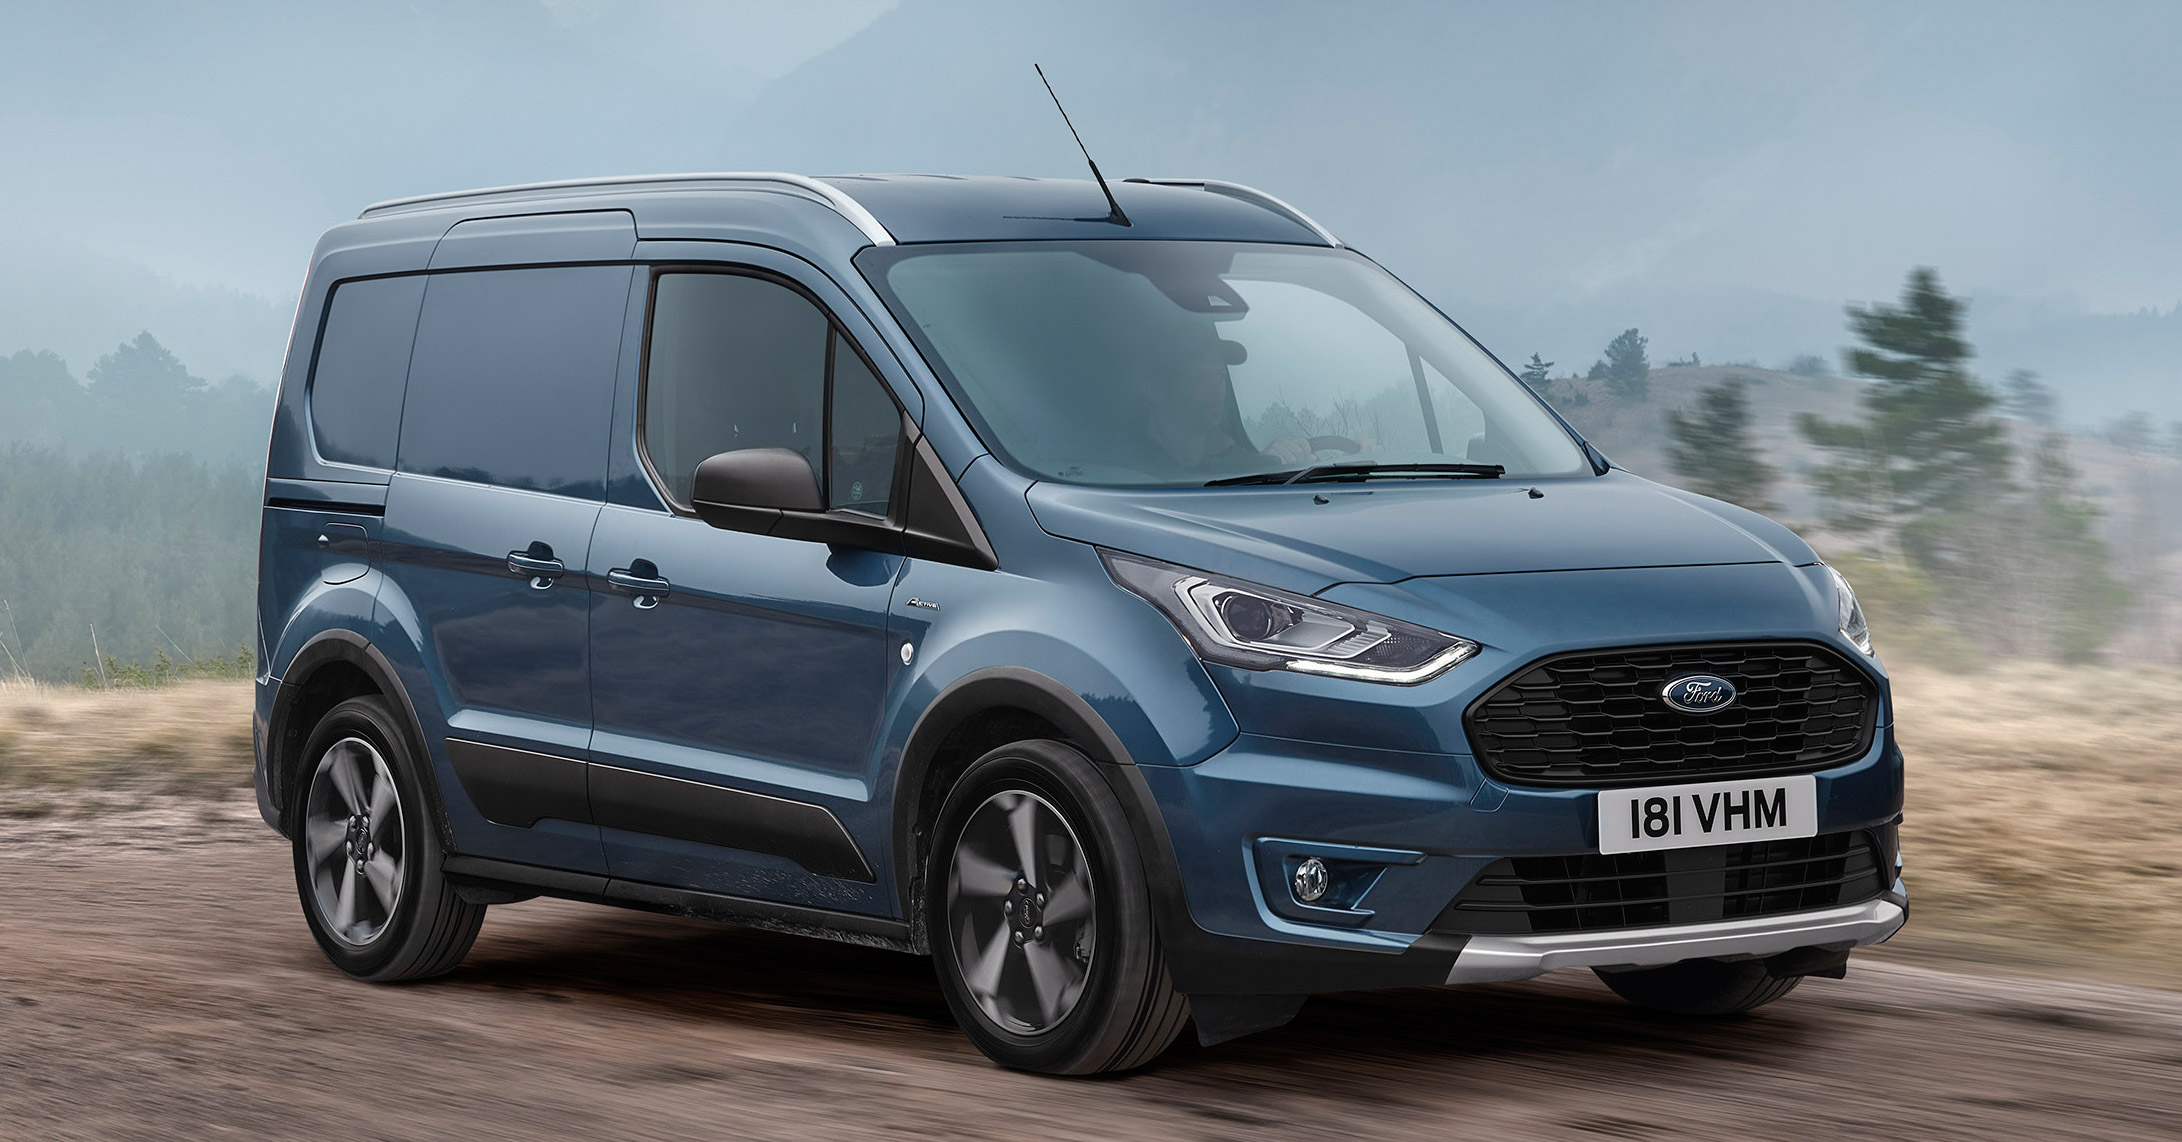 Connect 2023. Форд Торнео 2021. Форд Турнео 2021. Ford Transit connect 2020. Ford Tourneo connect 2021.